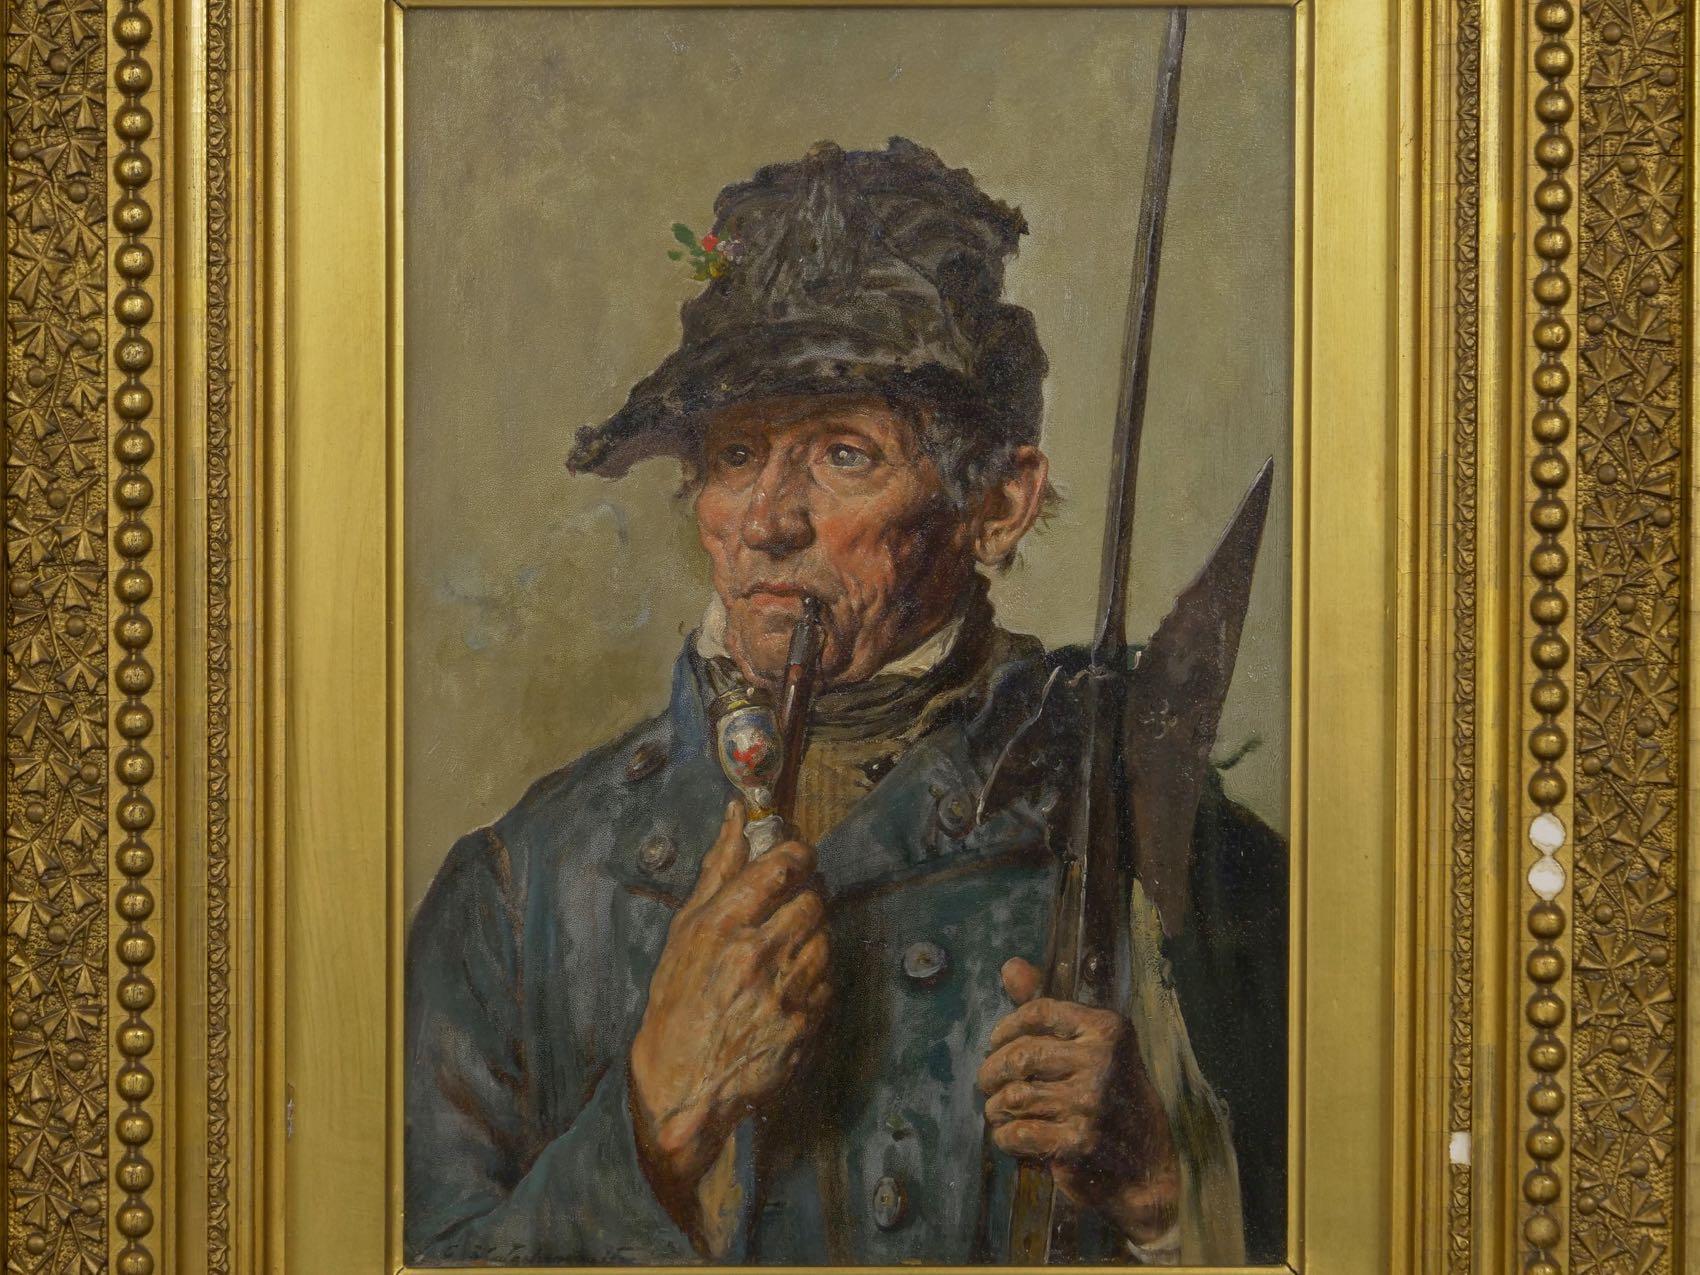 A very finely painted antique portrait painting, the work depicts an aged soldier in a wrinkled and worn charcoal cap and a heavy wool coat puffing on his colorful pipe while looking off into the distance. In his left hand he grasps his halberd